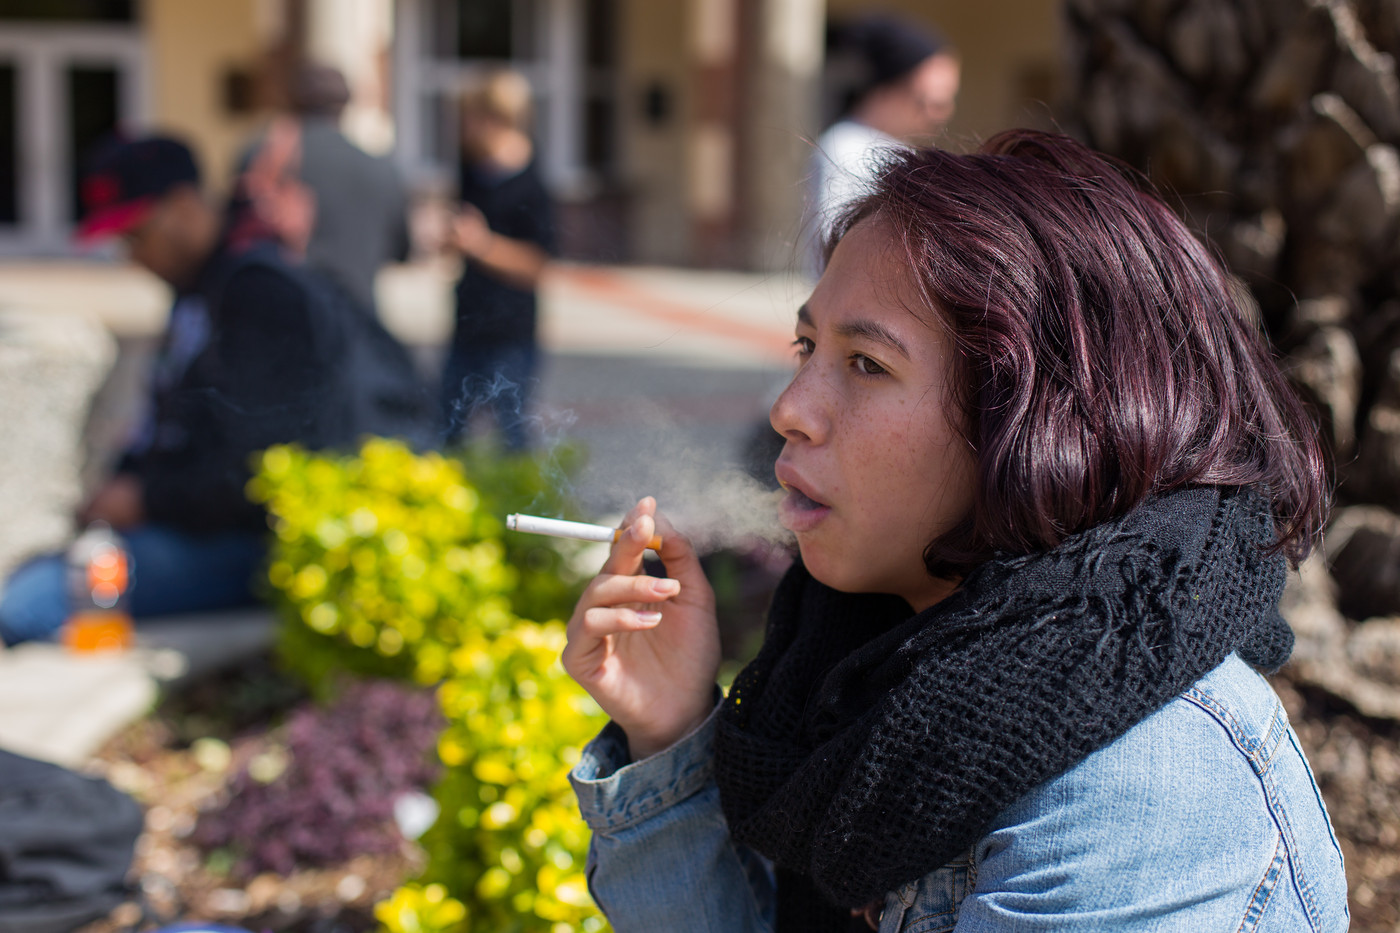 Why one smoker is happy ash trays are disappearing